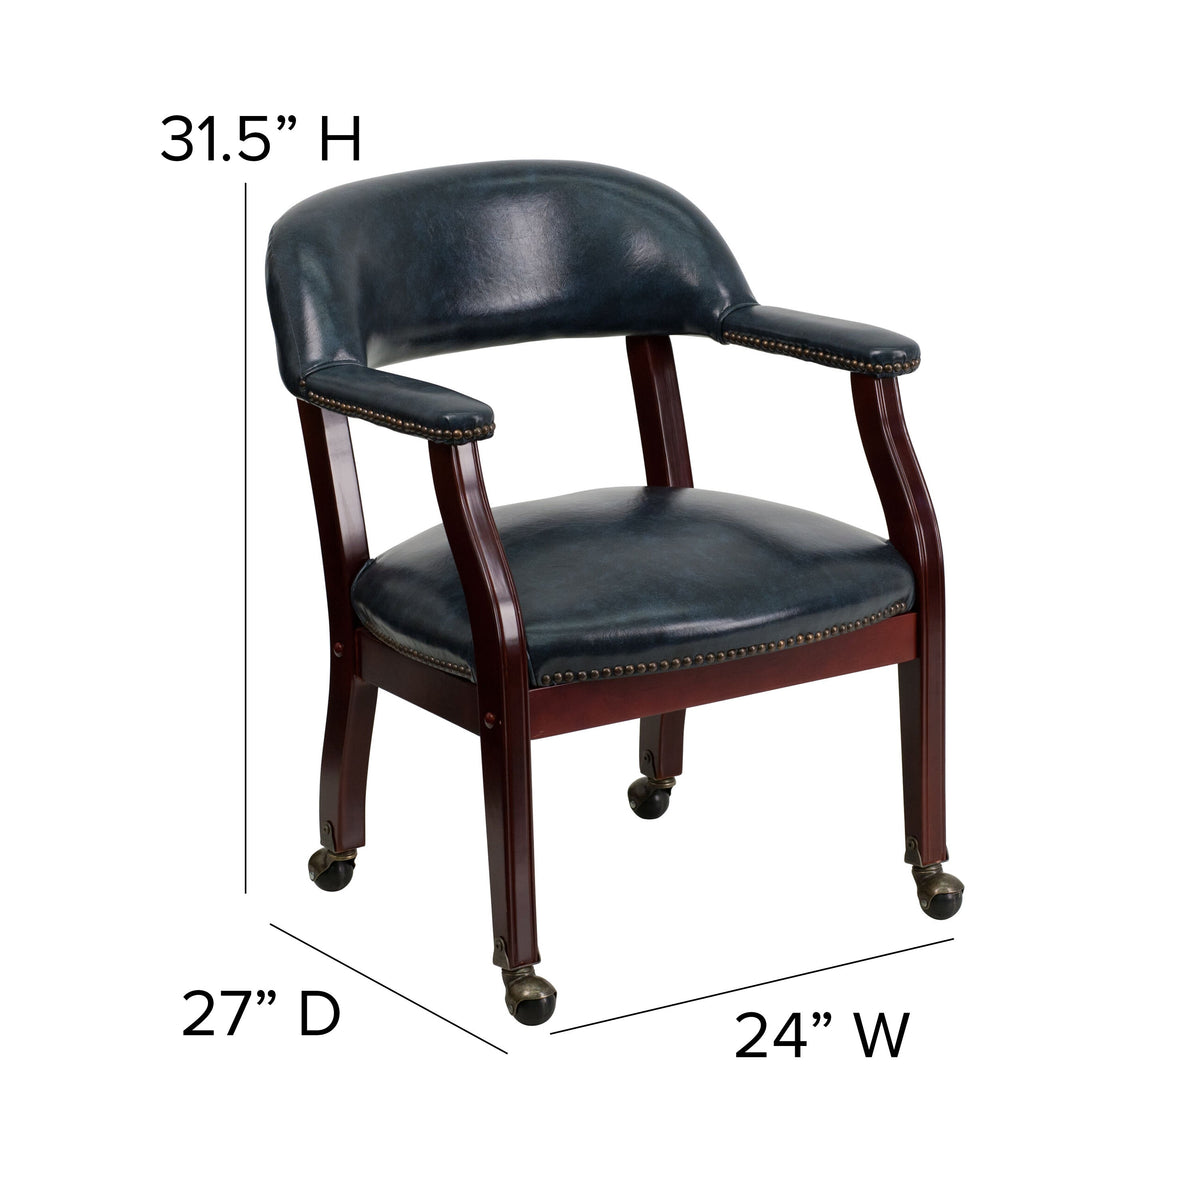 Navy Vinyl |#| Navy Vinyl Luxurious Conference Chair with Accent Nail Trim and Casters